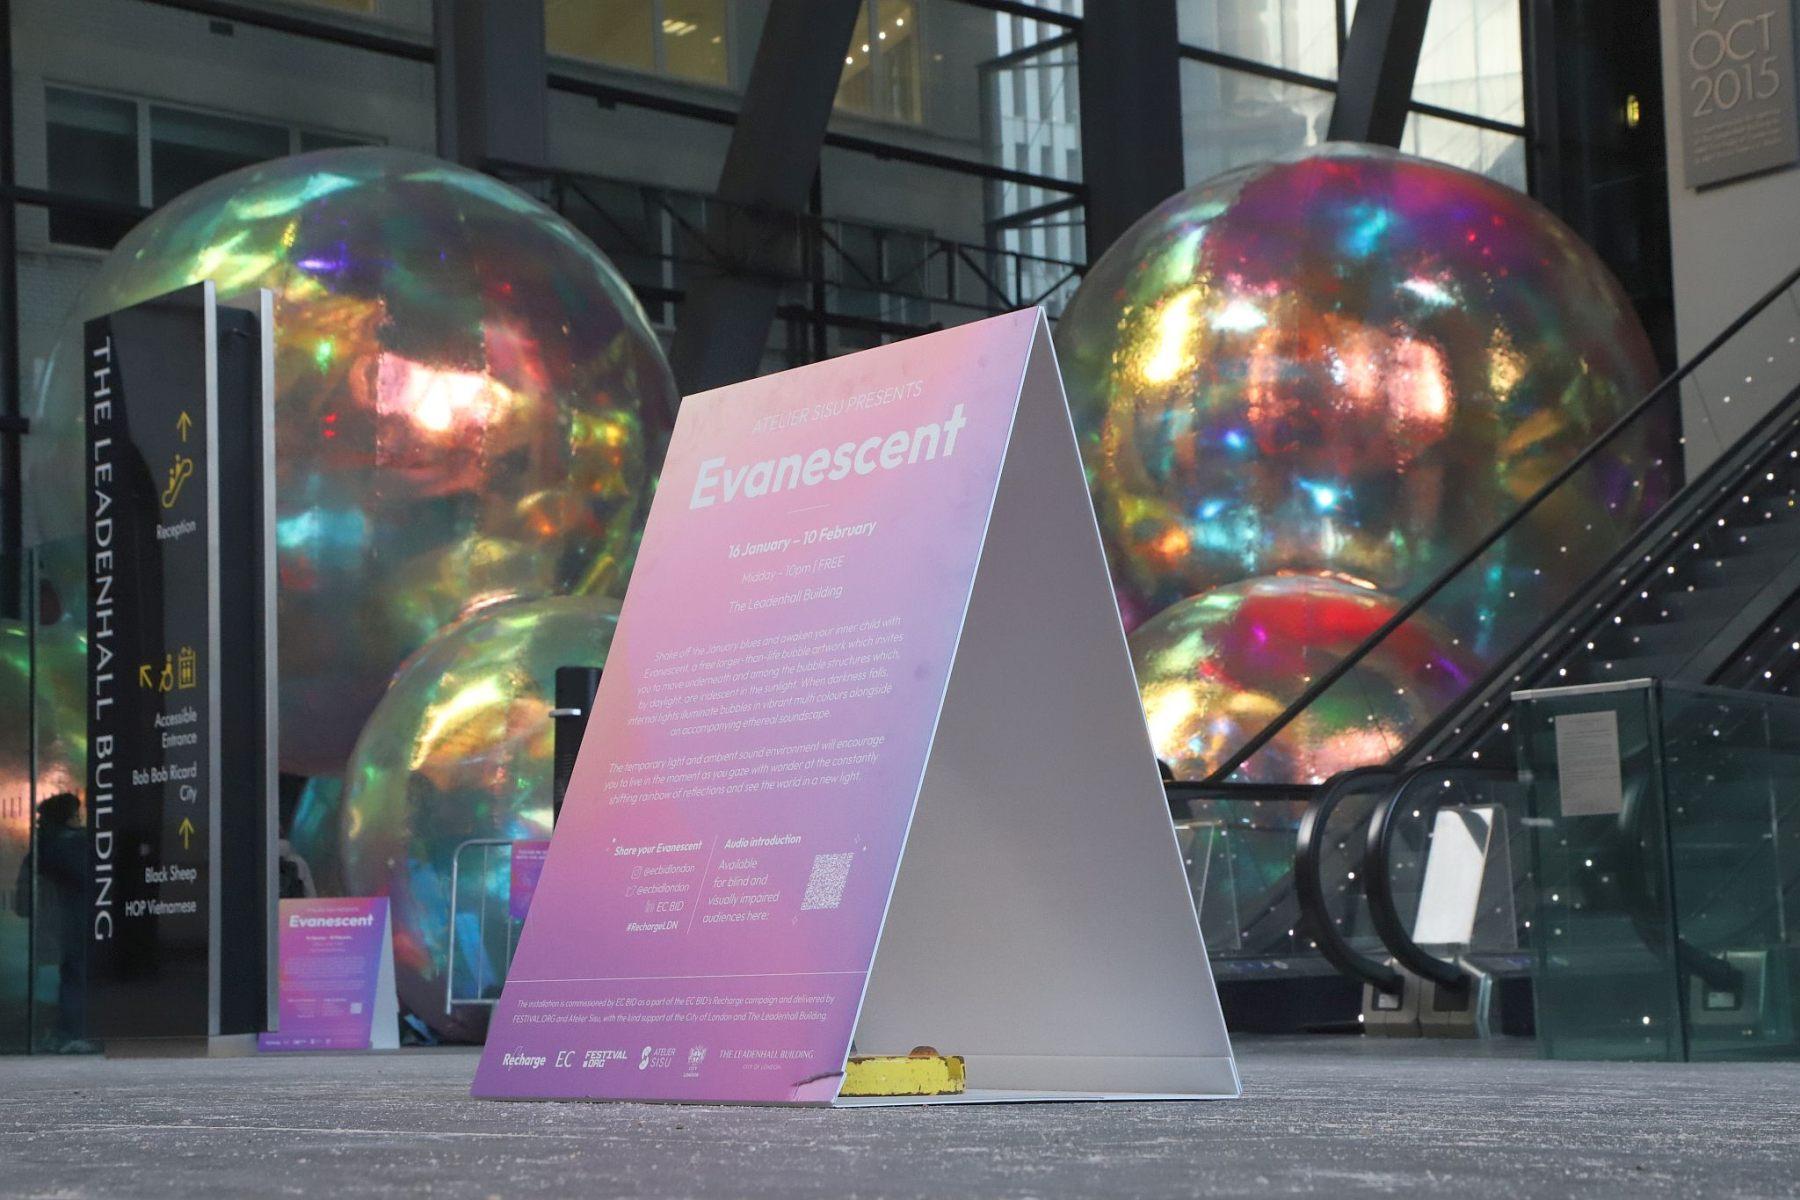 Evanescent presented by Atelier Sisu at the Leadenhall Building. January 2023.